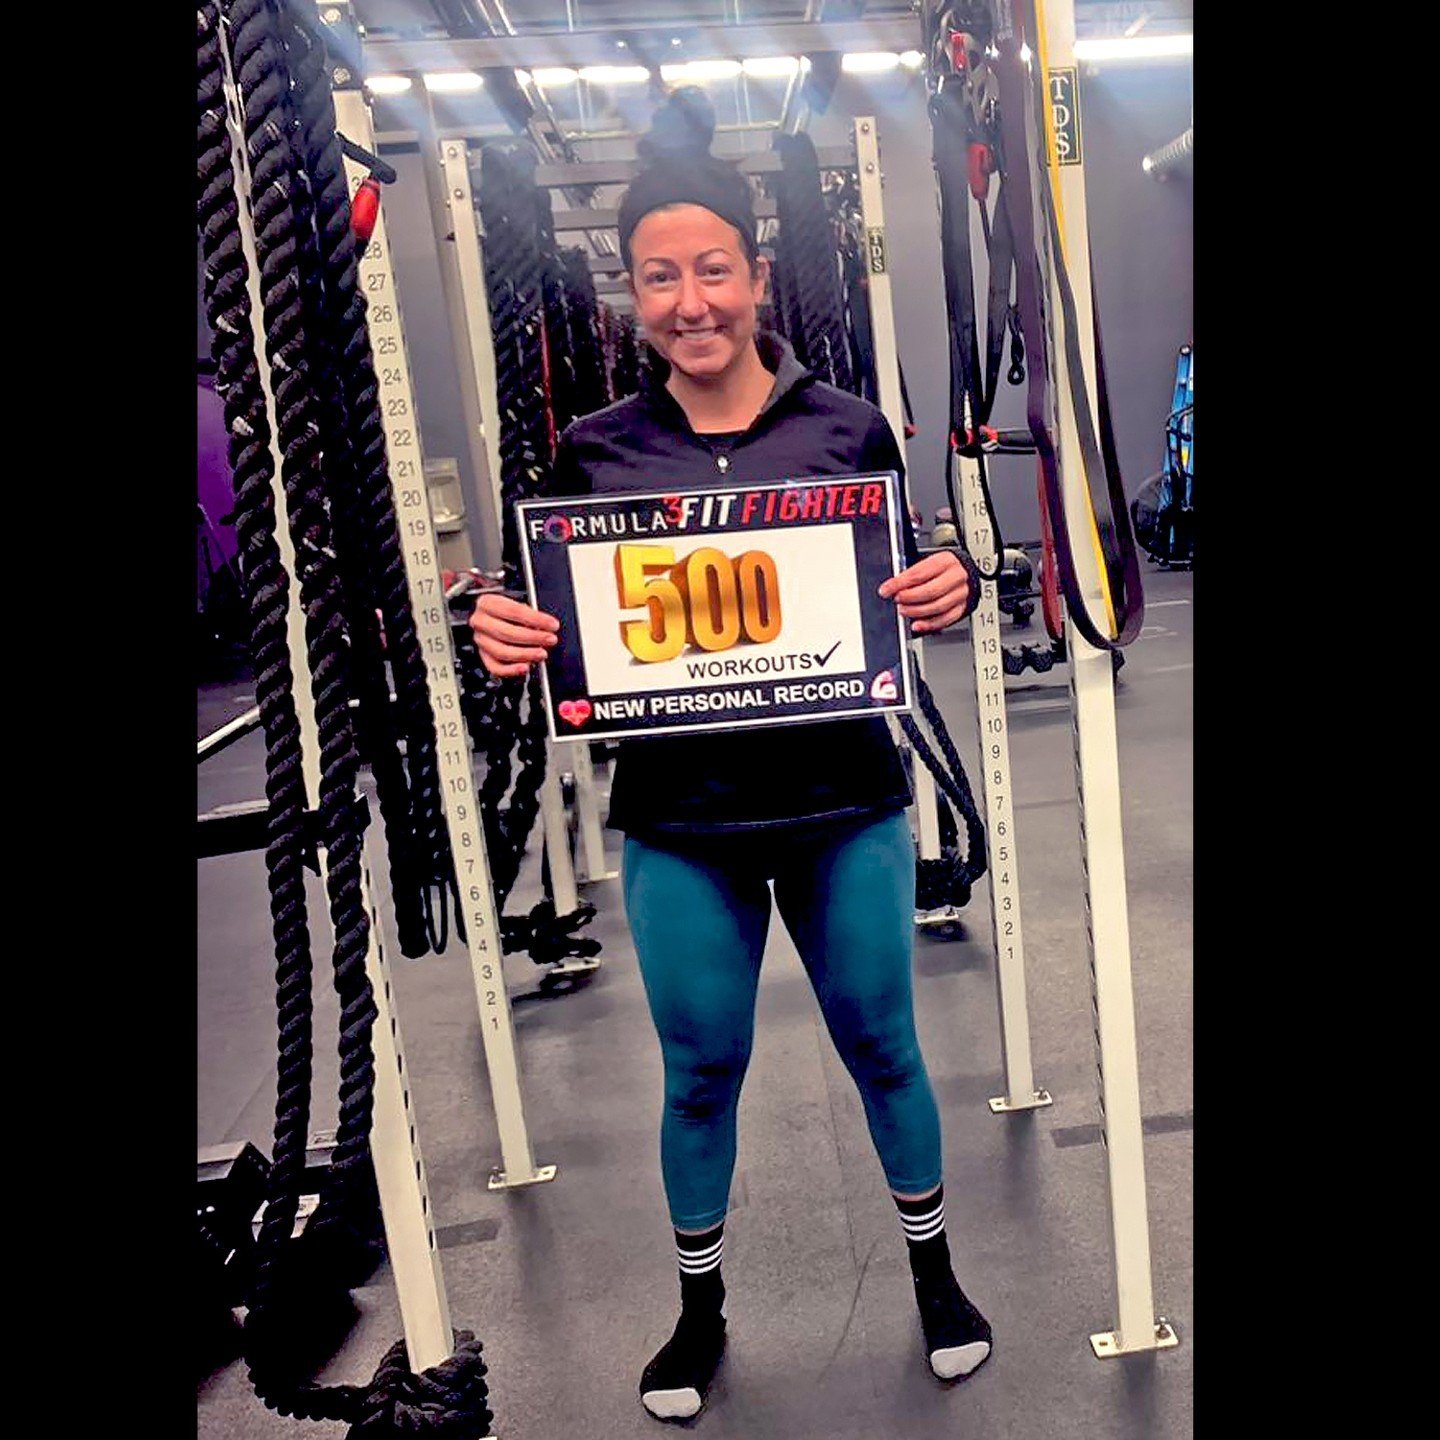 We're absolutely thrilled to celebrate a monumental achievement with one of our amazing  #F3Fitfam members, Rachel!  500 workouts and counting &ndash; that's some serious dedication and hard work! 🔥 😍

Rachel, your commitment to your fitness journe